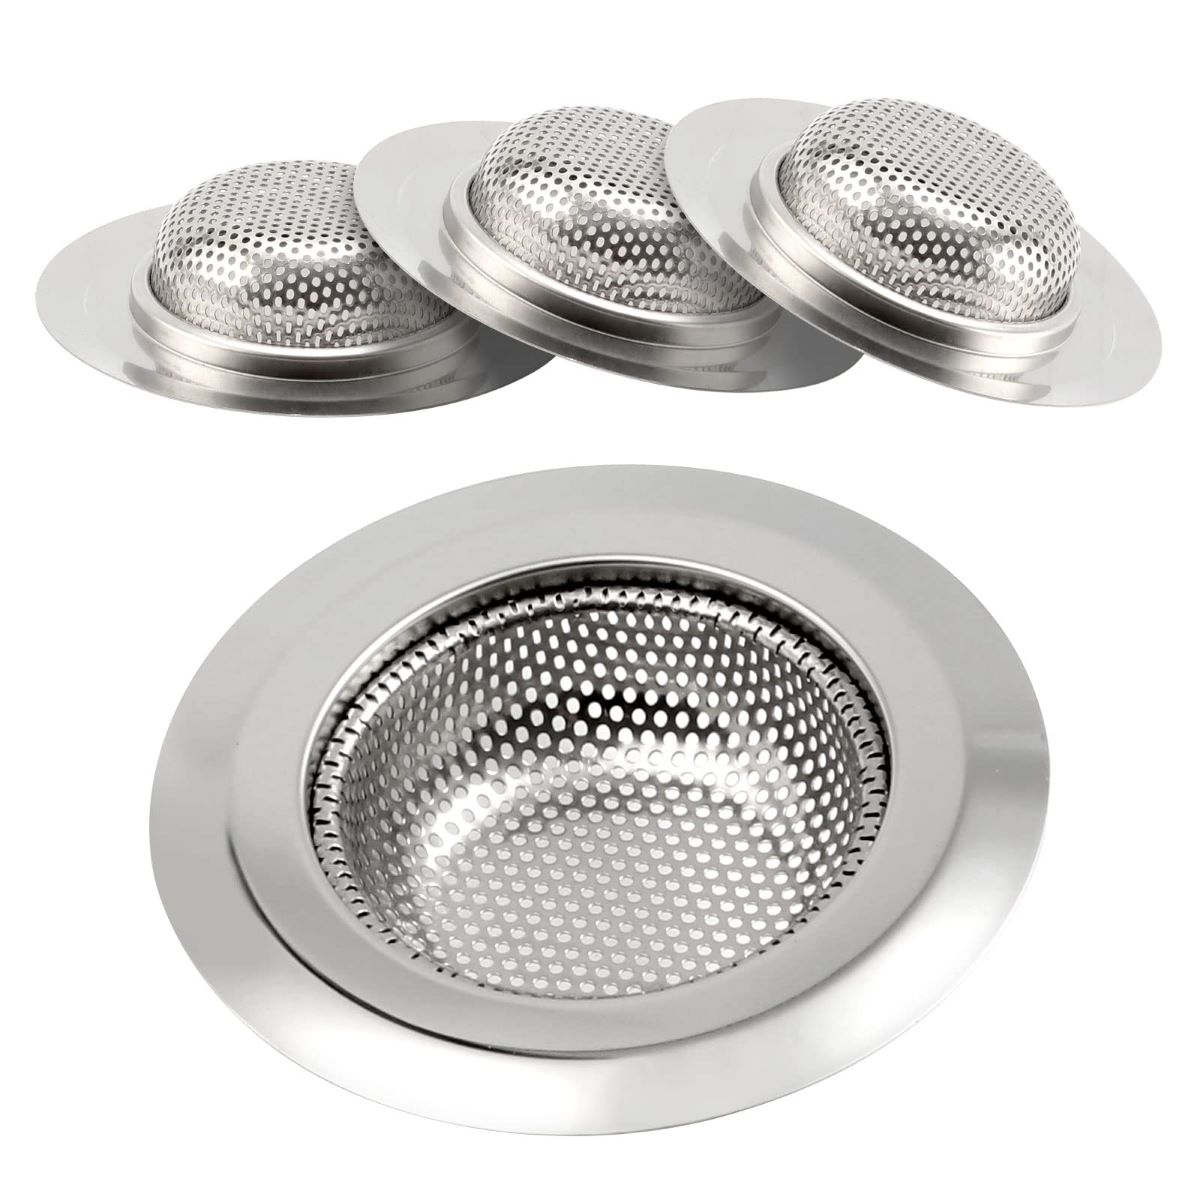 How To Replace A Sink Strainer